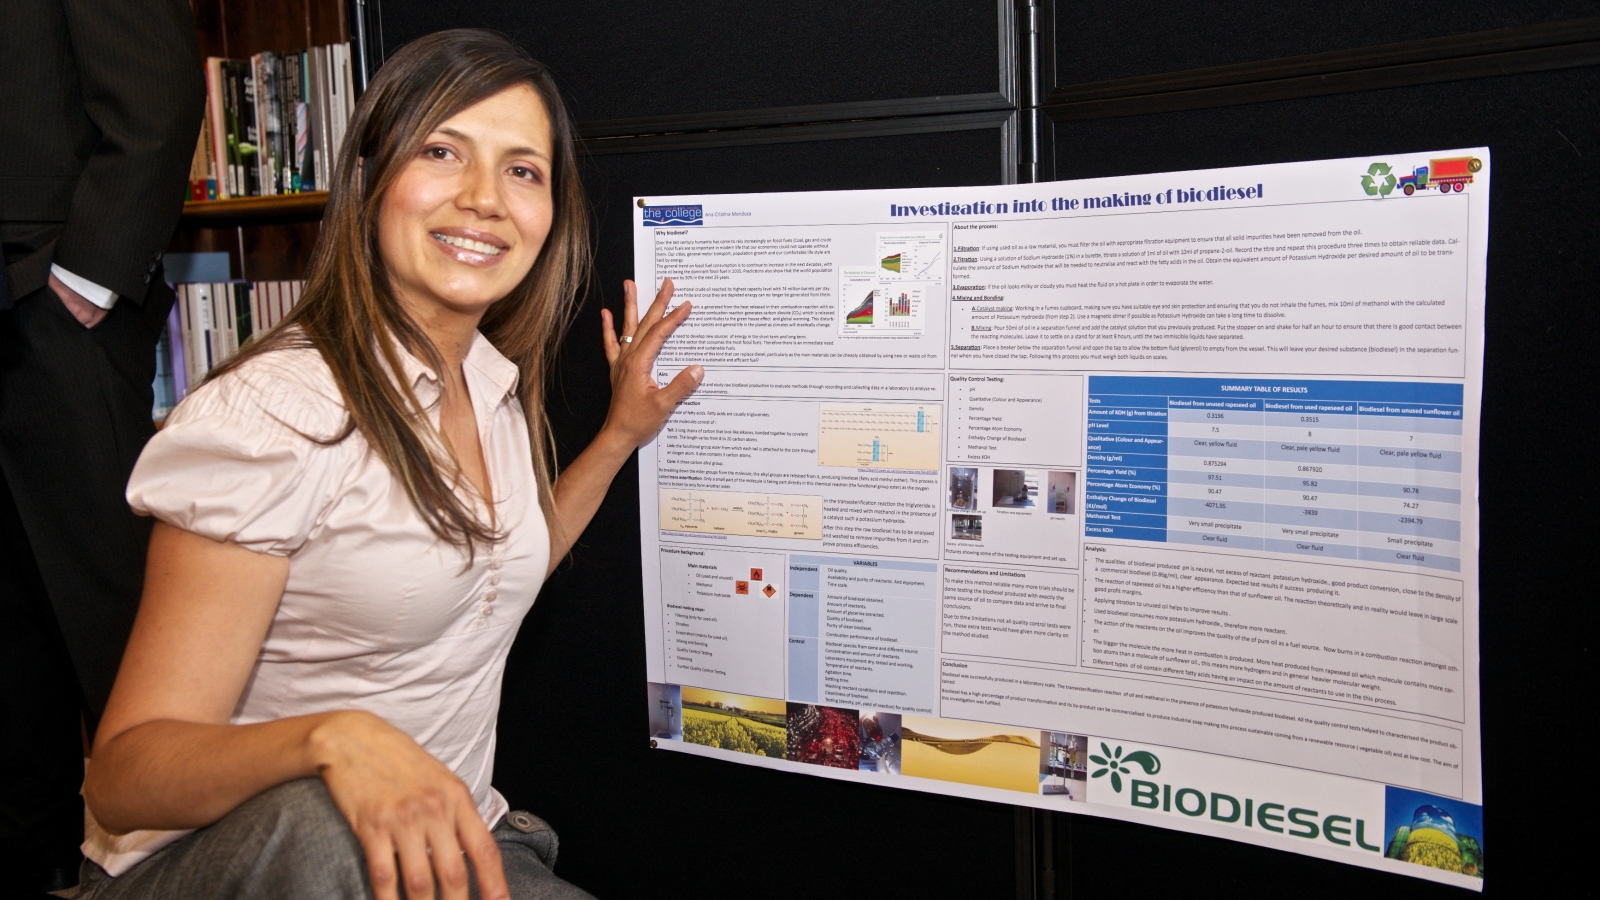 Female scientist with her poster